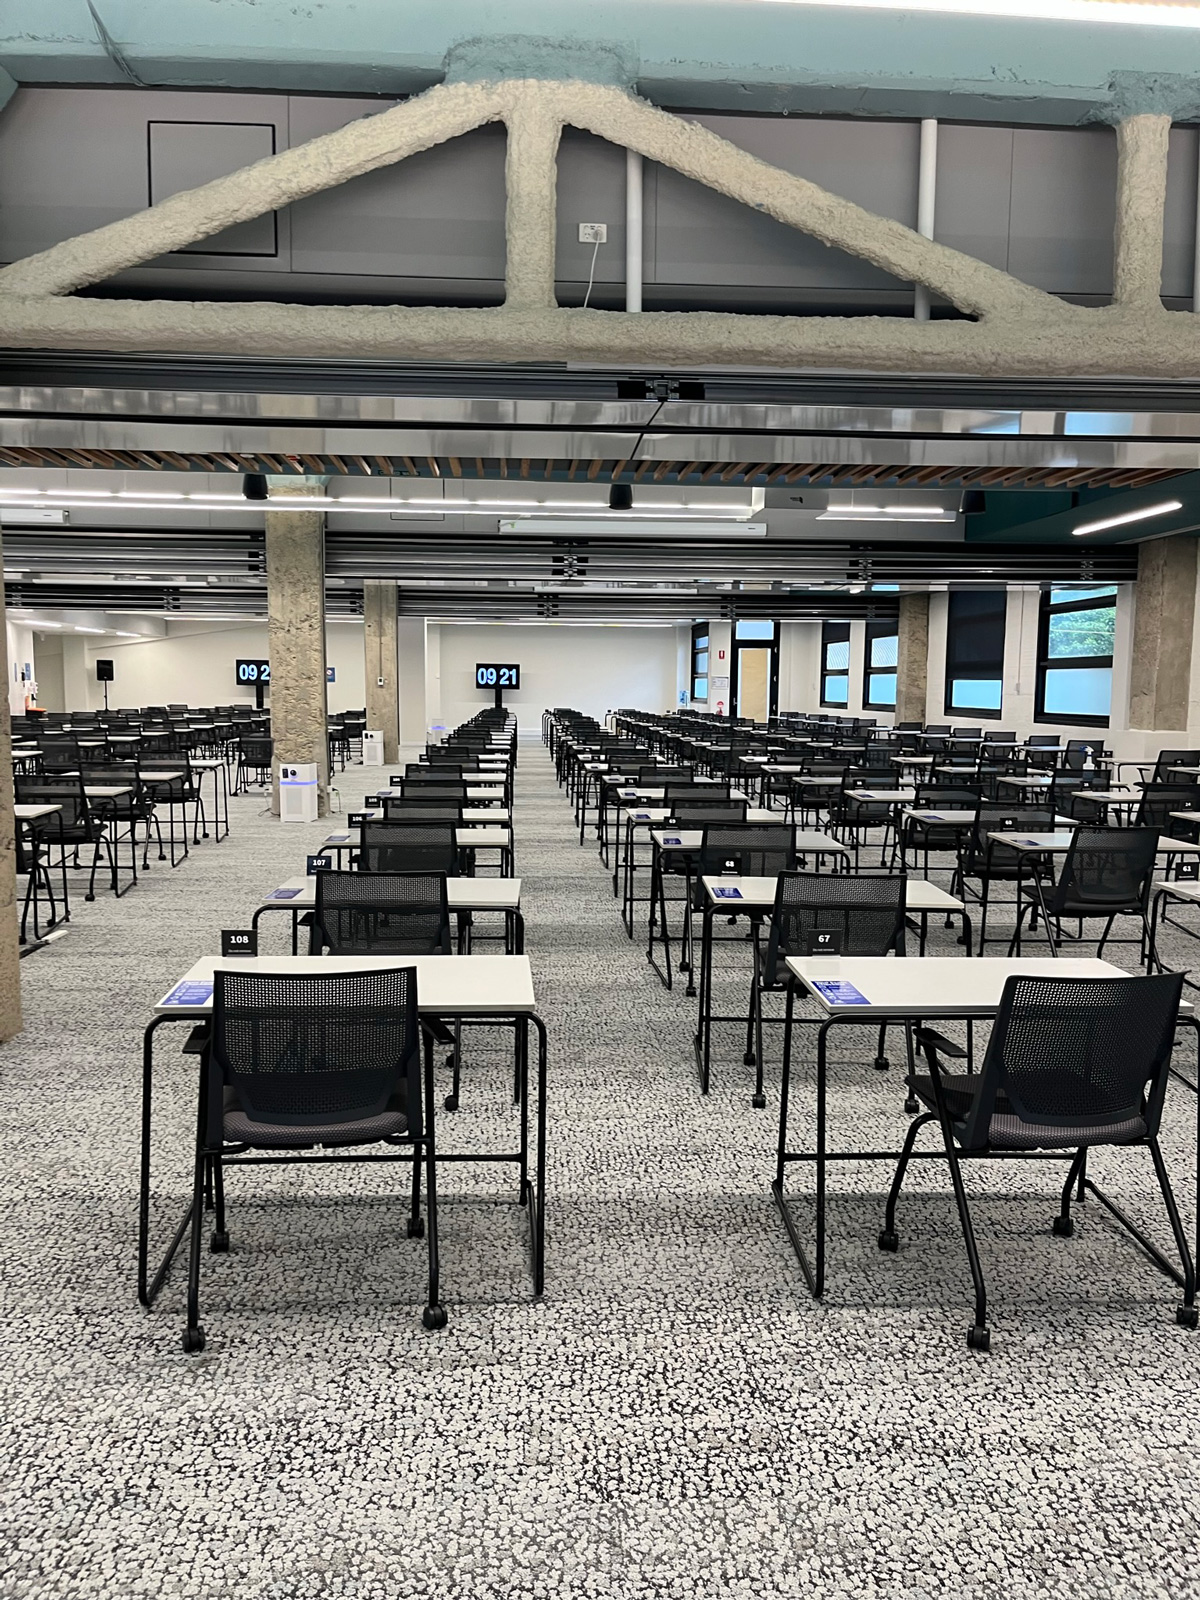 Many rows of individual chairs and desks for exams.